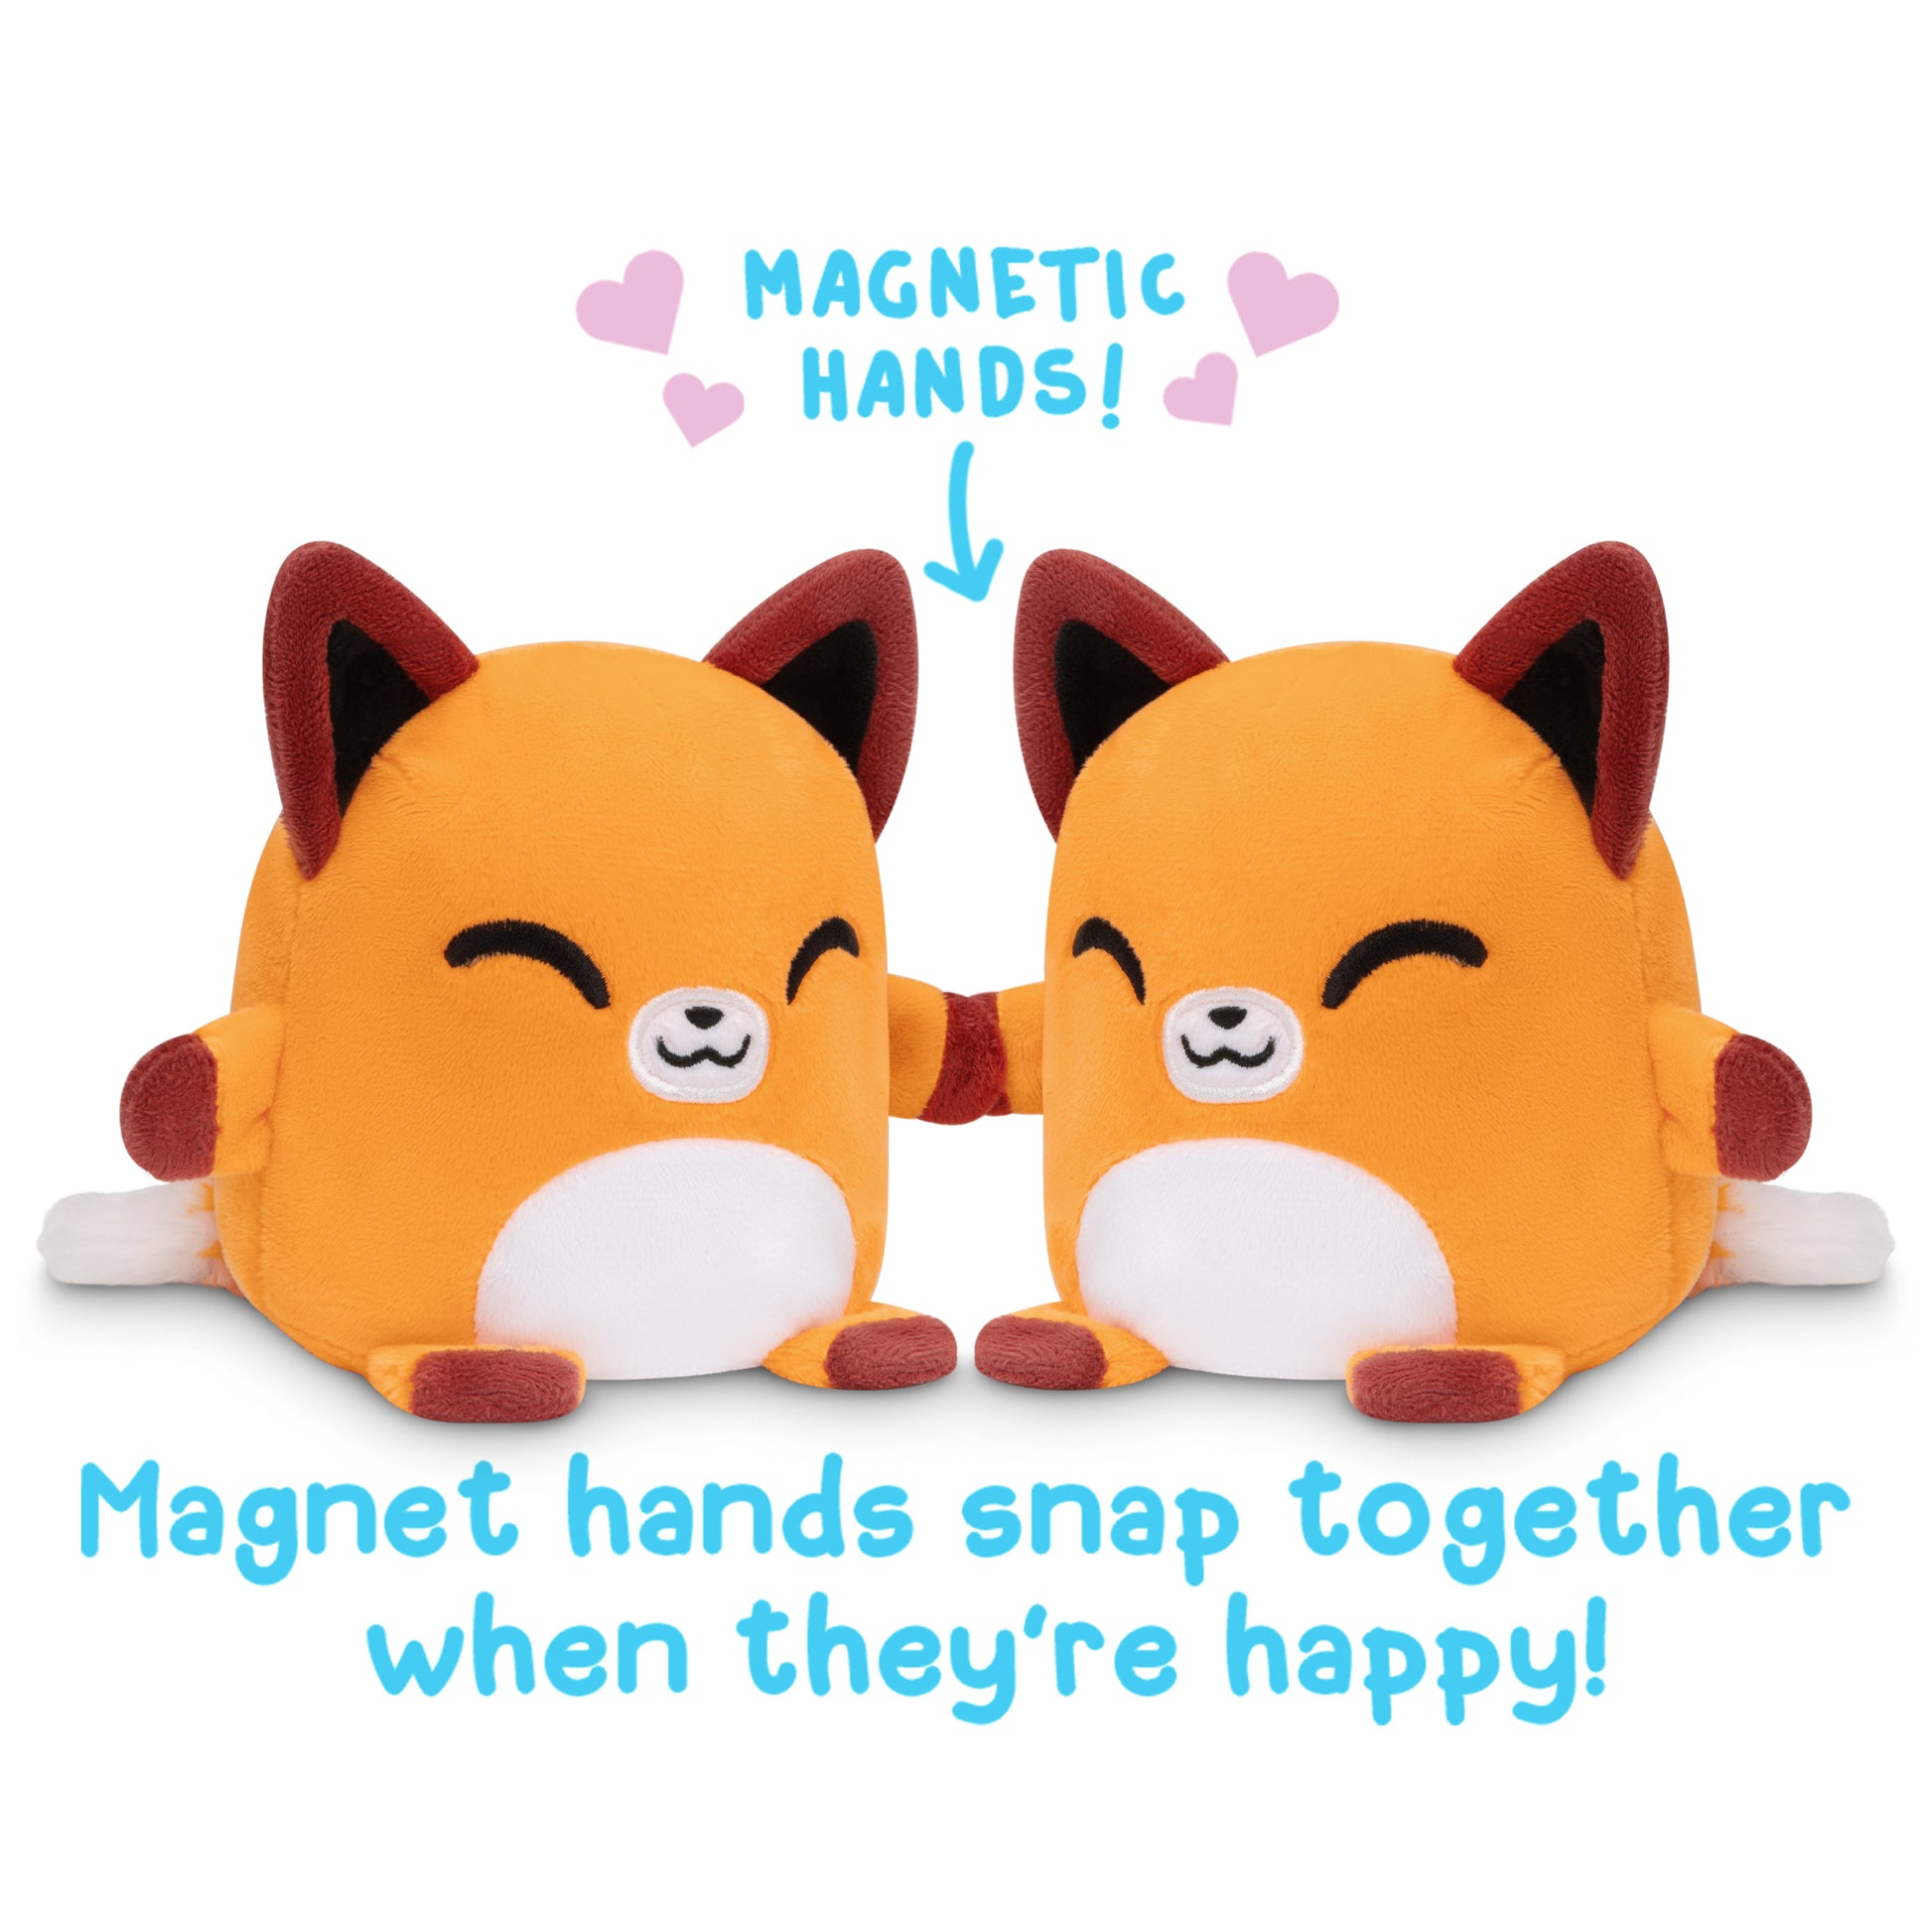 Two TeeTurtle Reversible Fox Plushmates with magnetic hands that snap together when they're happy. These plushmates, designed by TeeTurtle, offer a unique and charming way to bring joy and companionship.